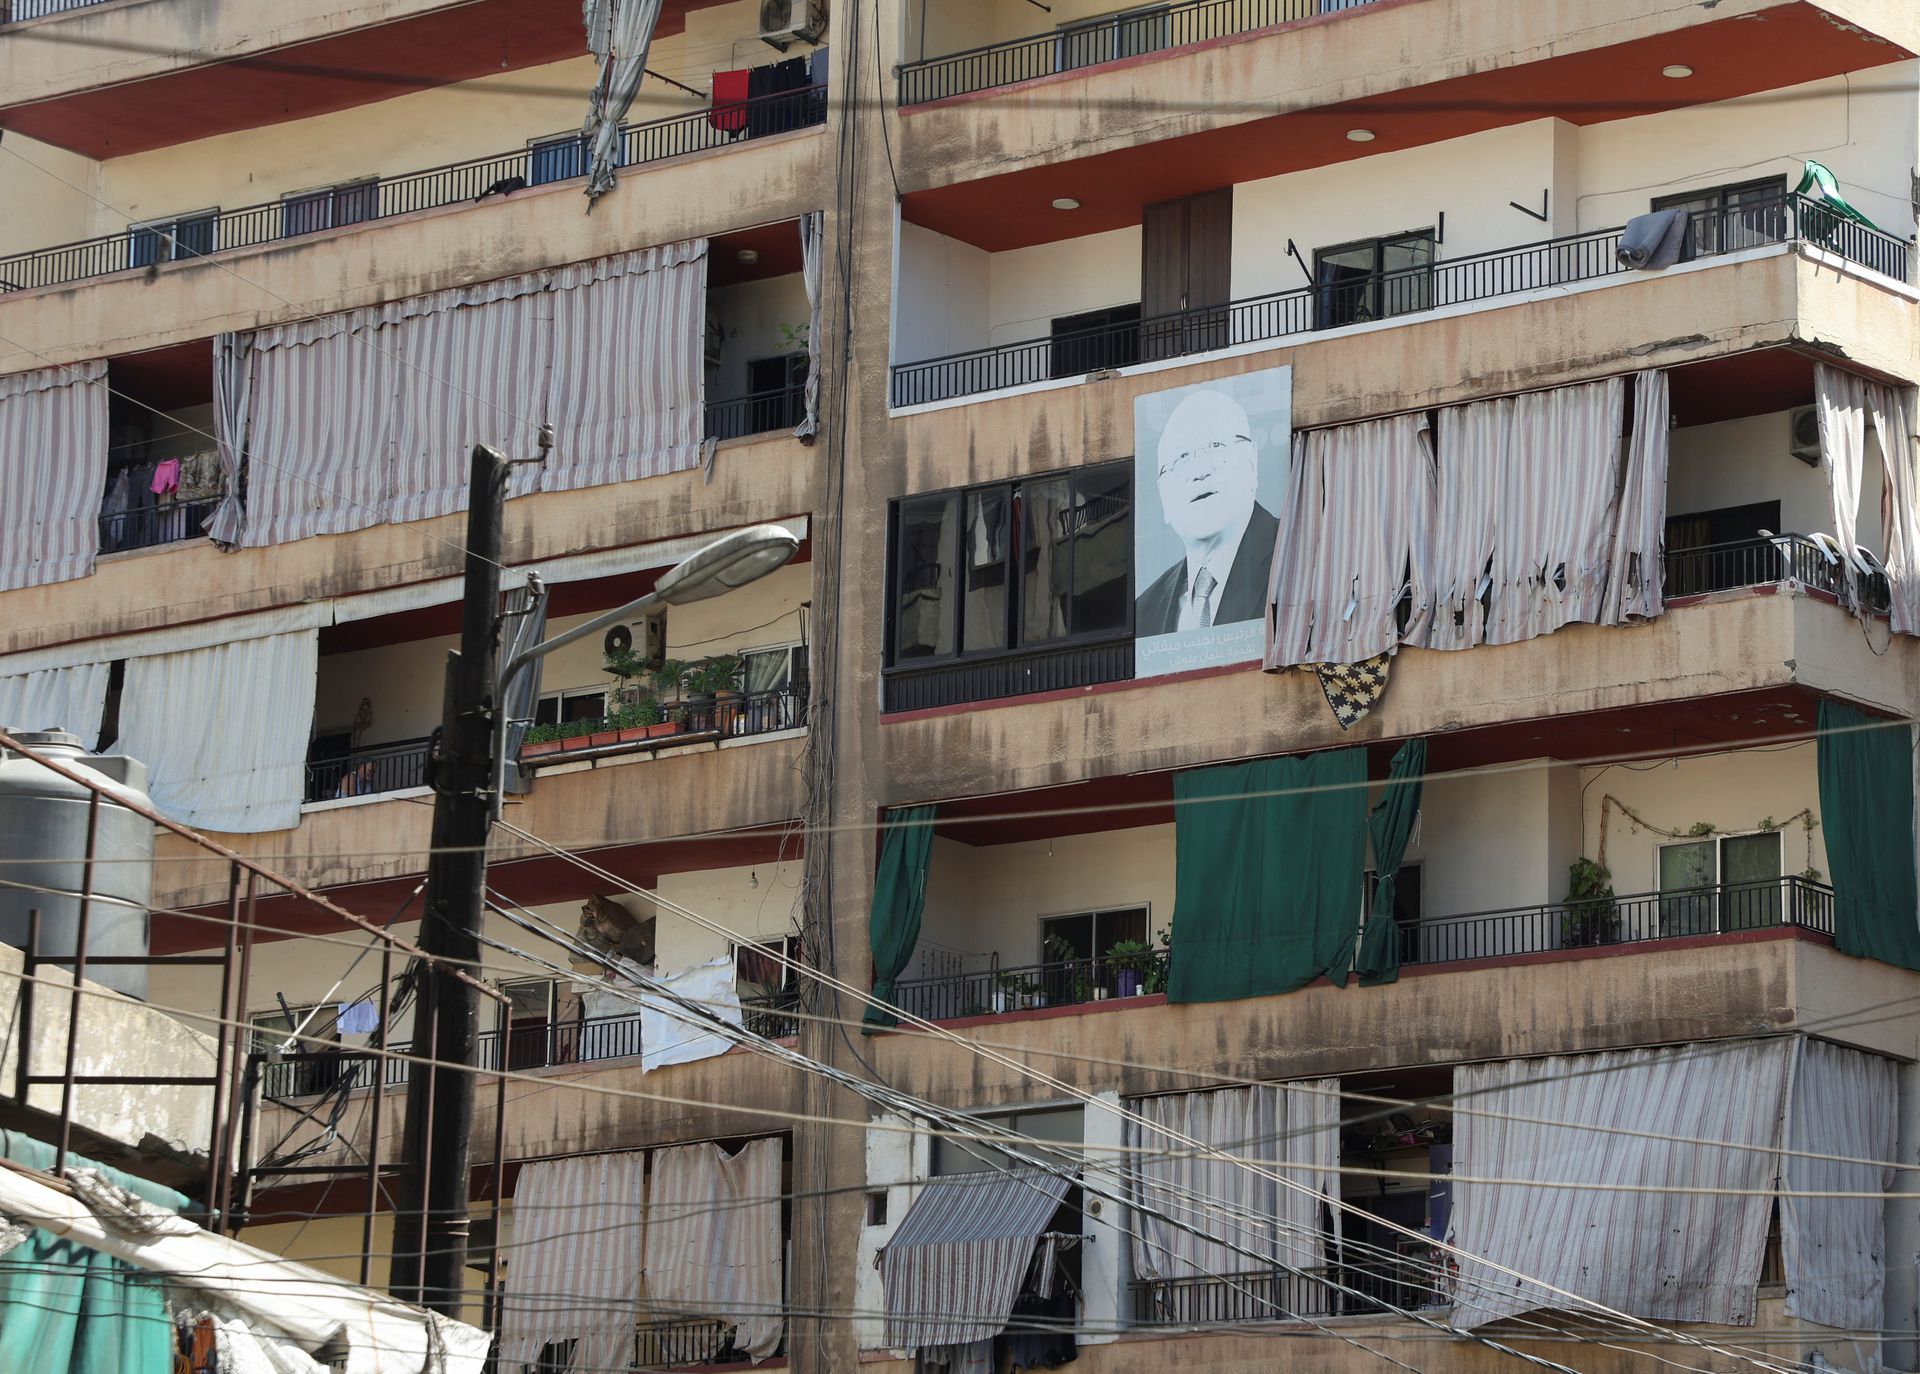 A picture of Lebanon's Prime Minister-designate Najib Mikati is placed on a residential building in the northern city of Tripoli, Lebanon Sept. 23. Photo: Mohamed Azakir/Reuters